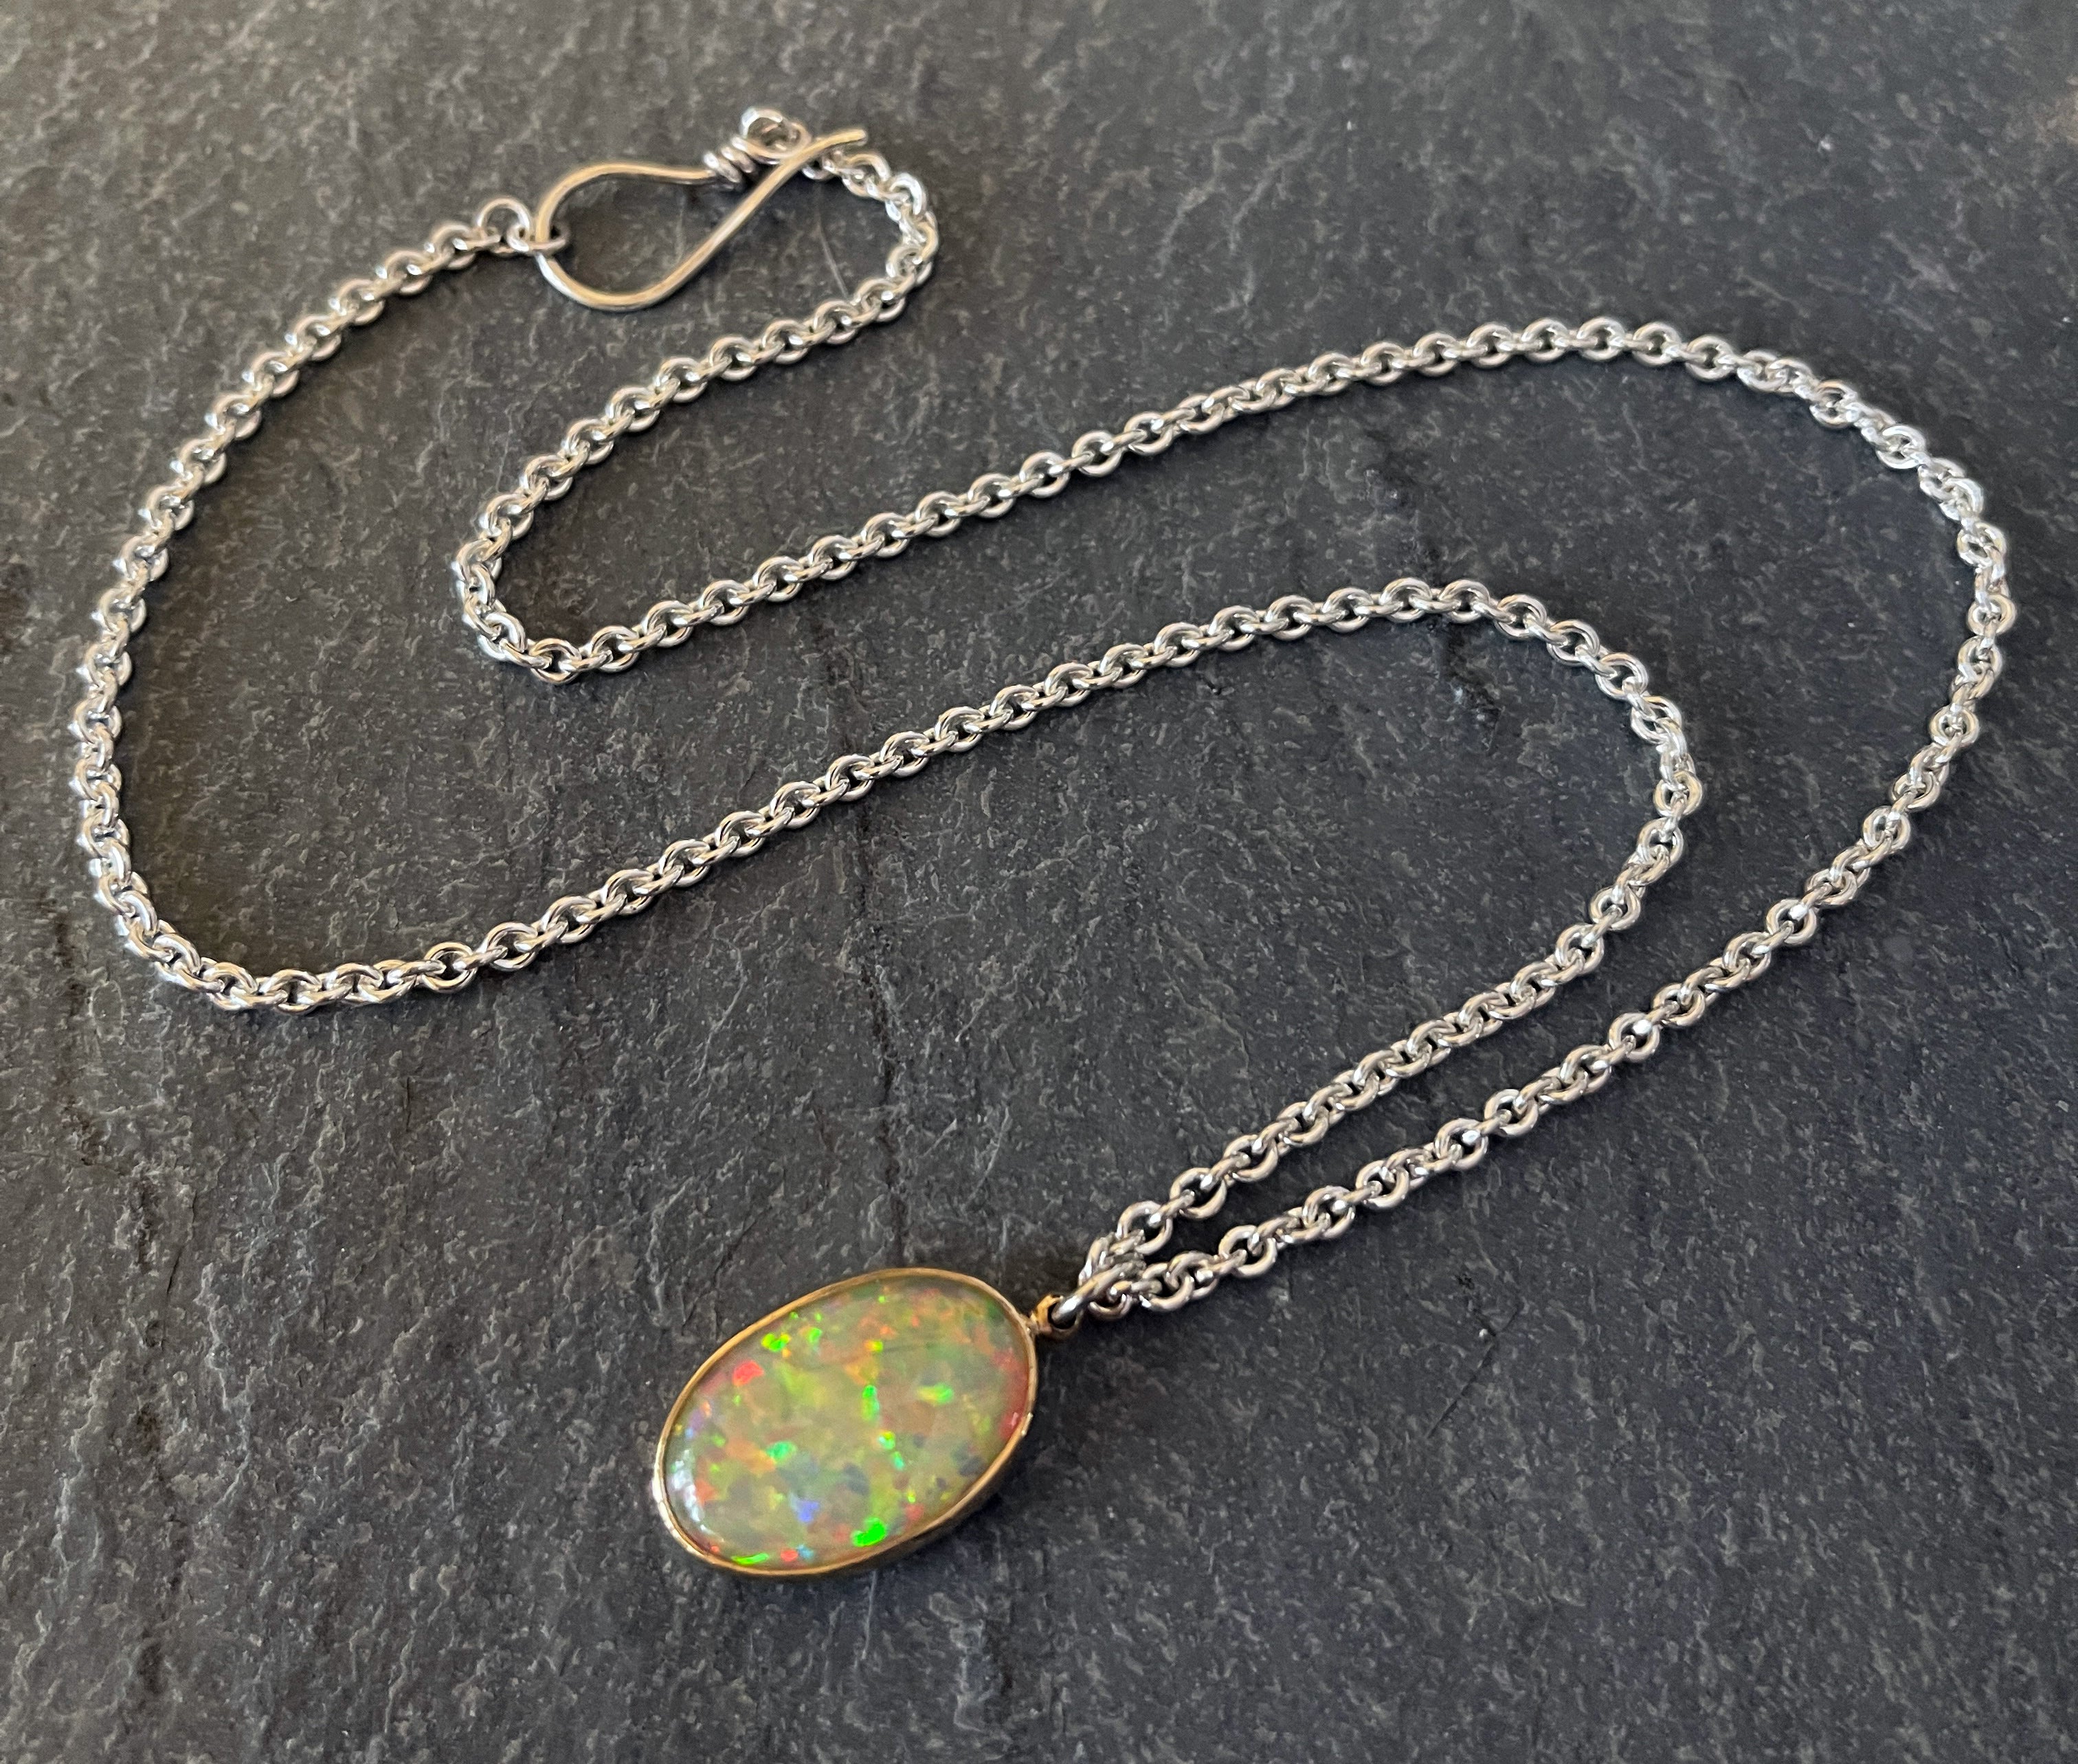 Buy Premium Ethiopian Welo Opal Necklace 18 Inches in Platinum Over  Sterling Silver 21.25 ctw at ShopLC.